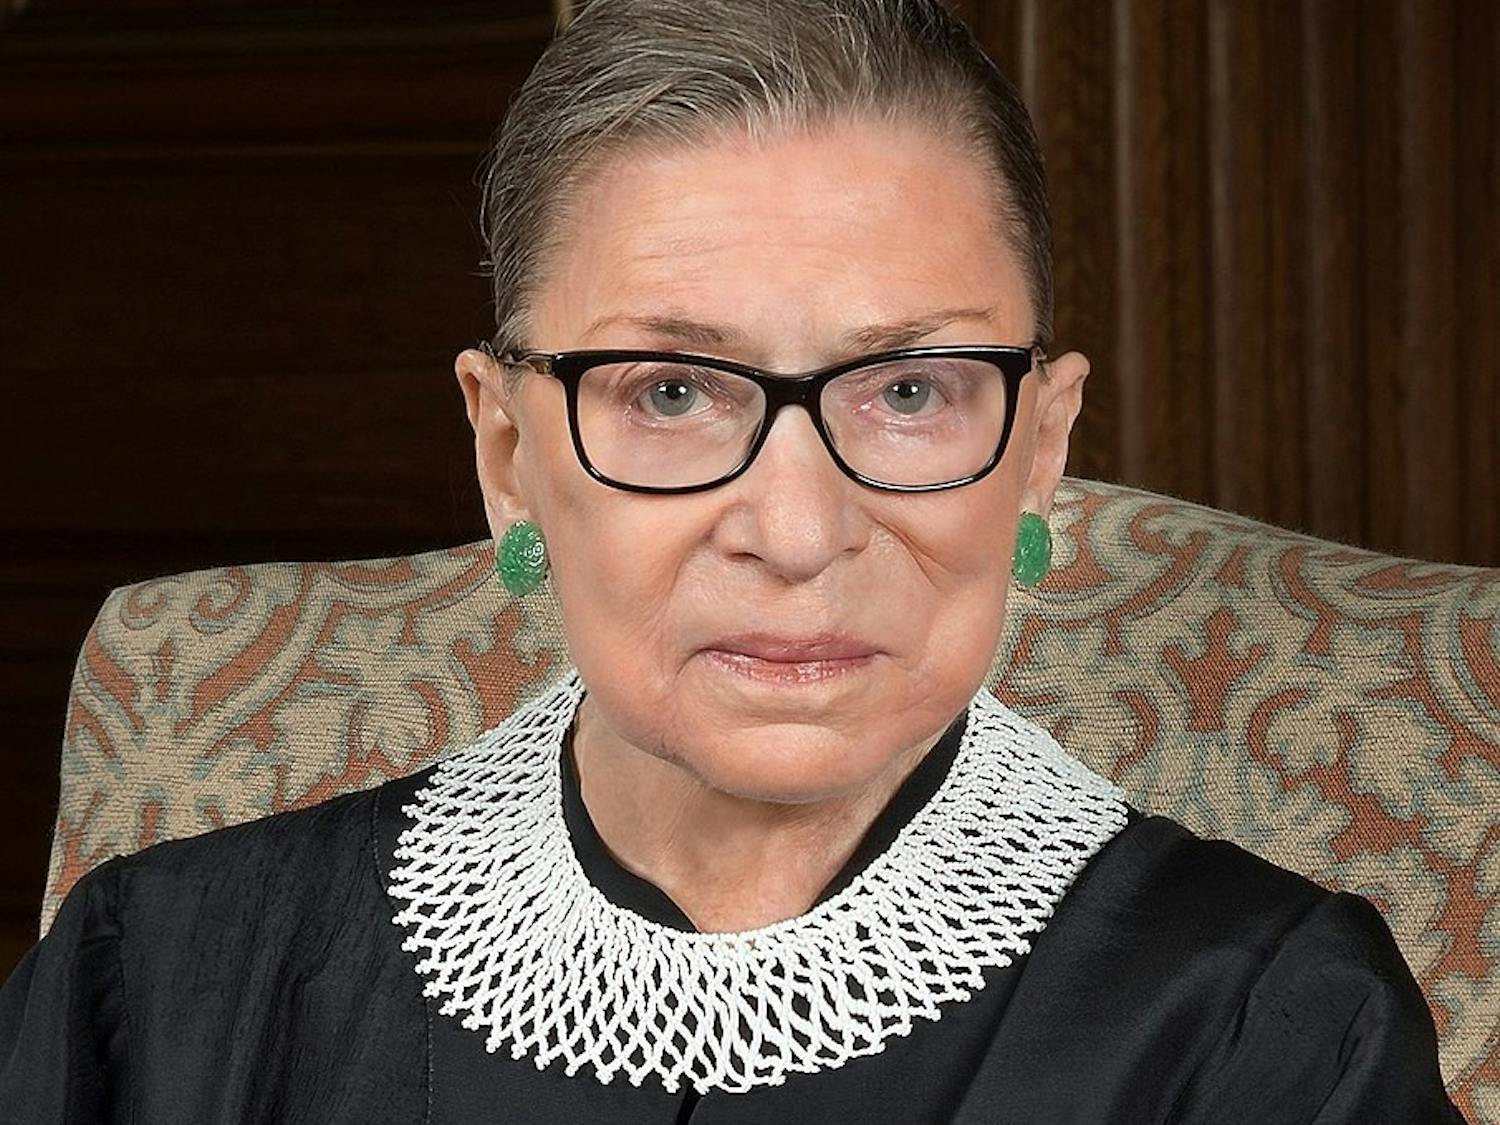 906px-Ruth_Bader_Ginsburg_2016_portrait_cropped.jpg